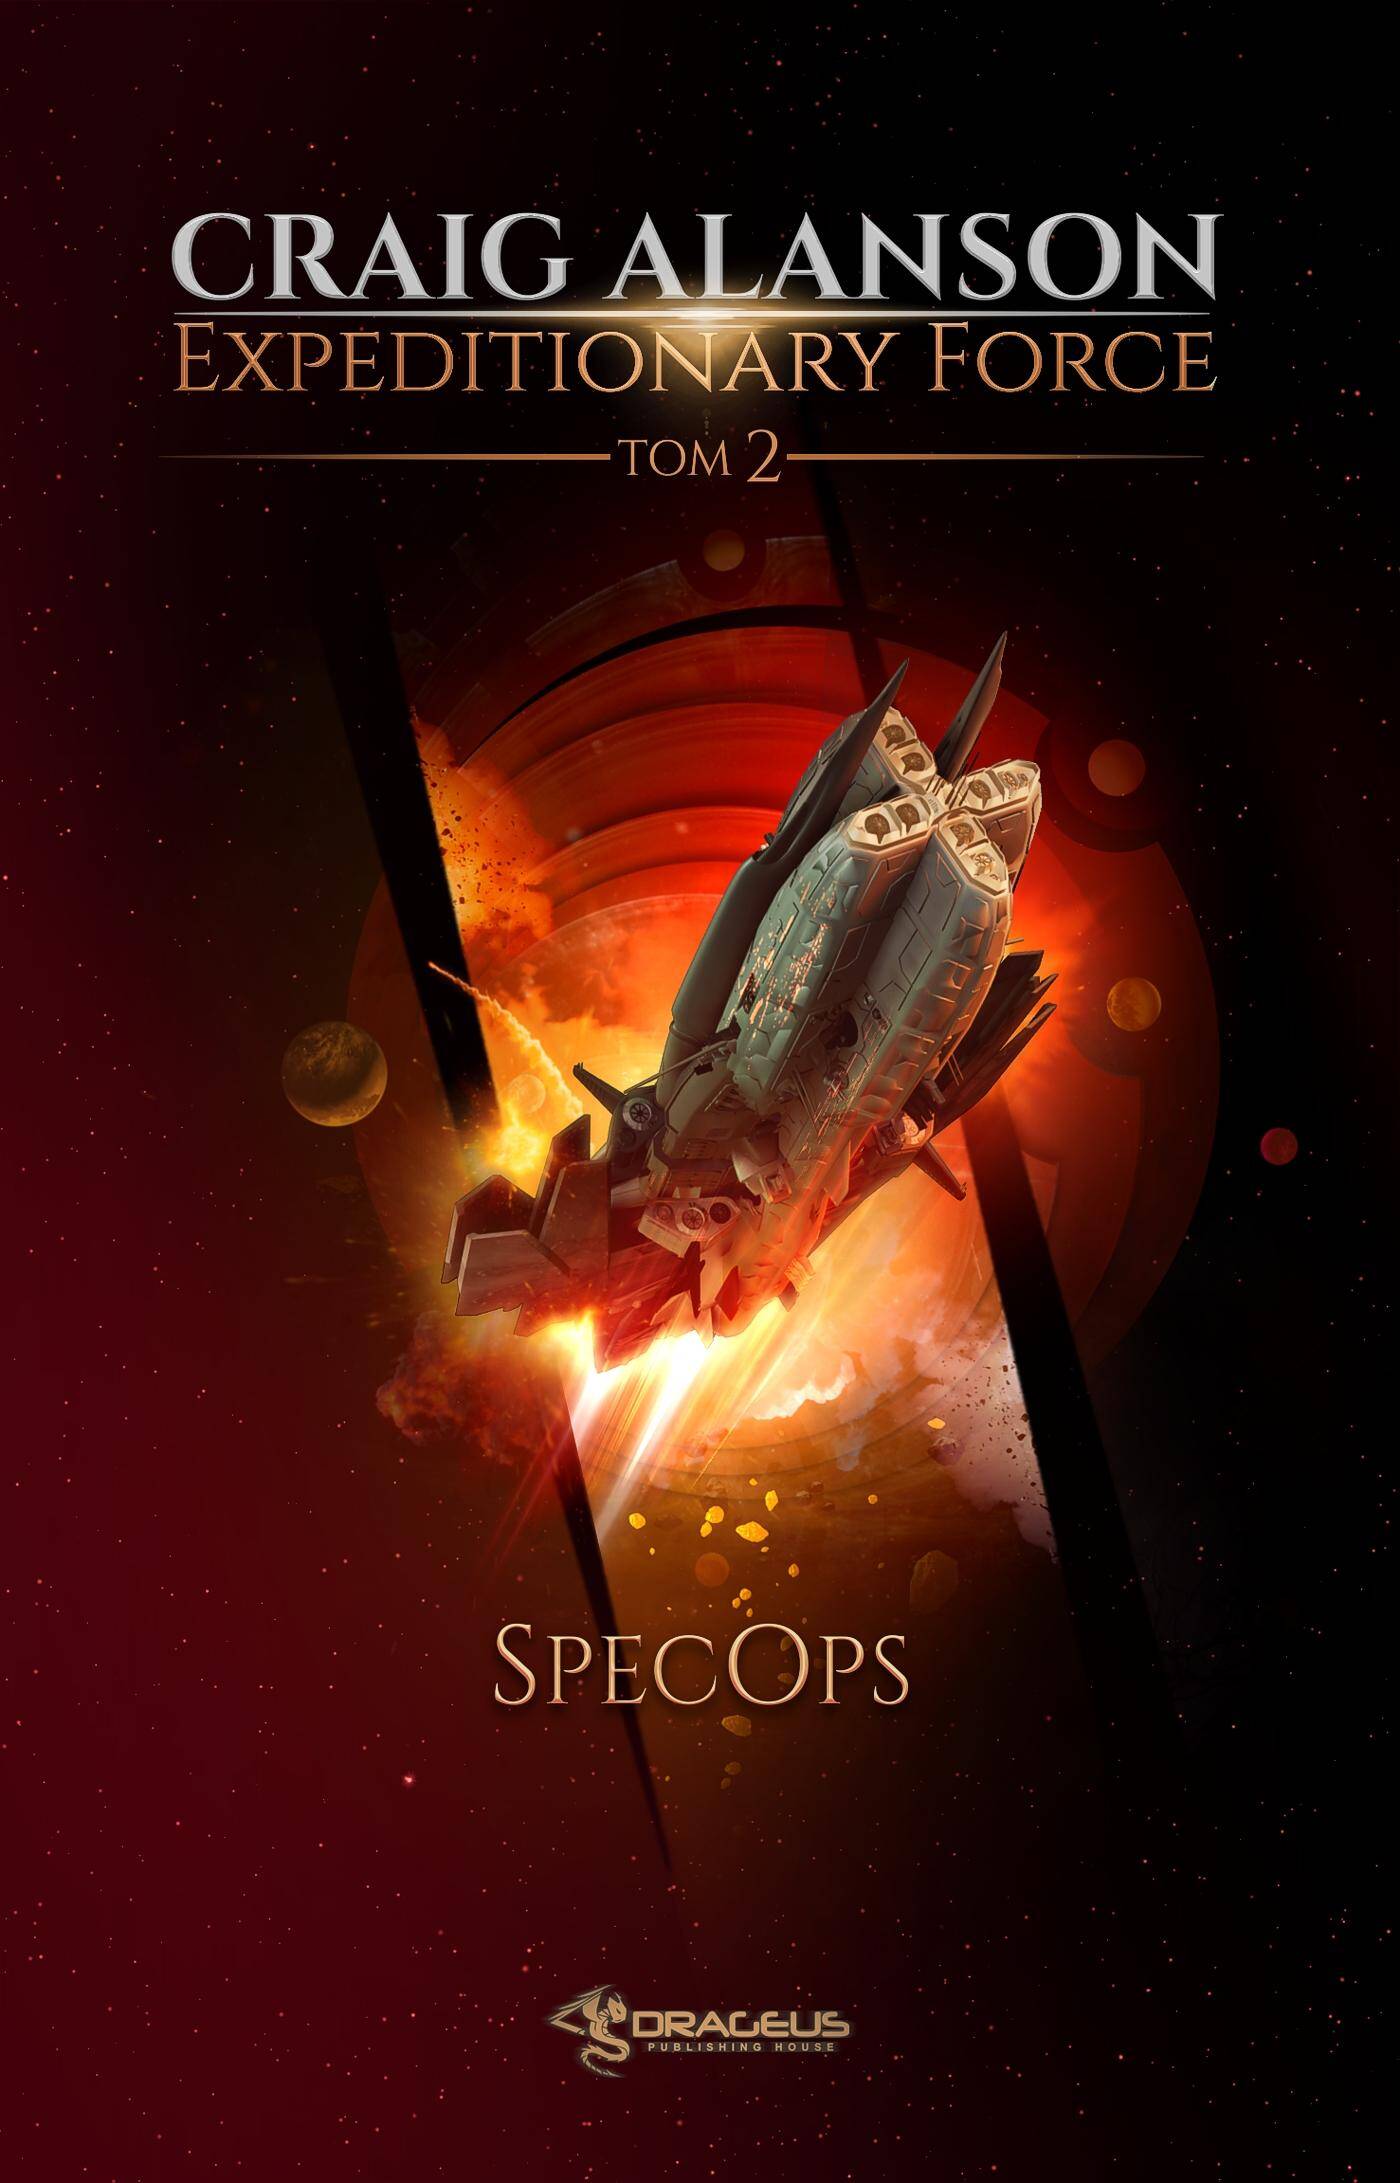 SpecOps. Expeditionary Force. Tom 2